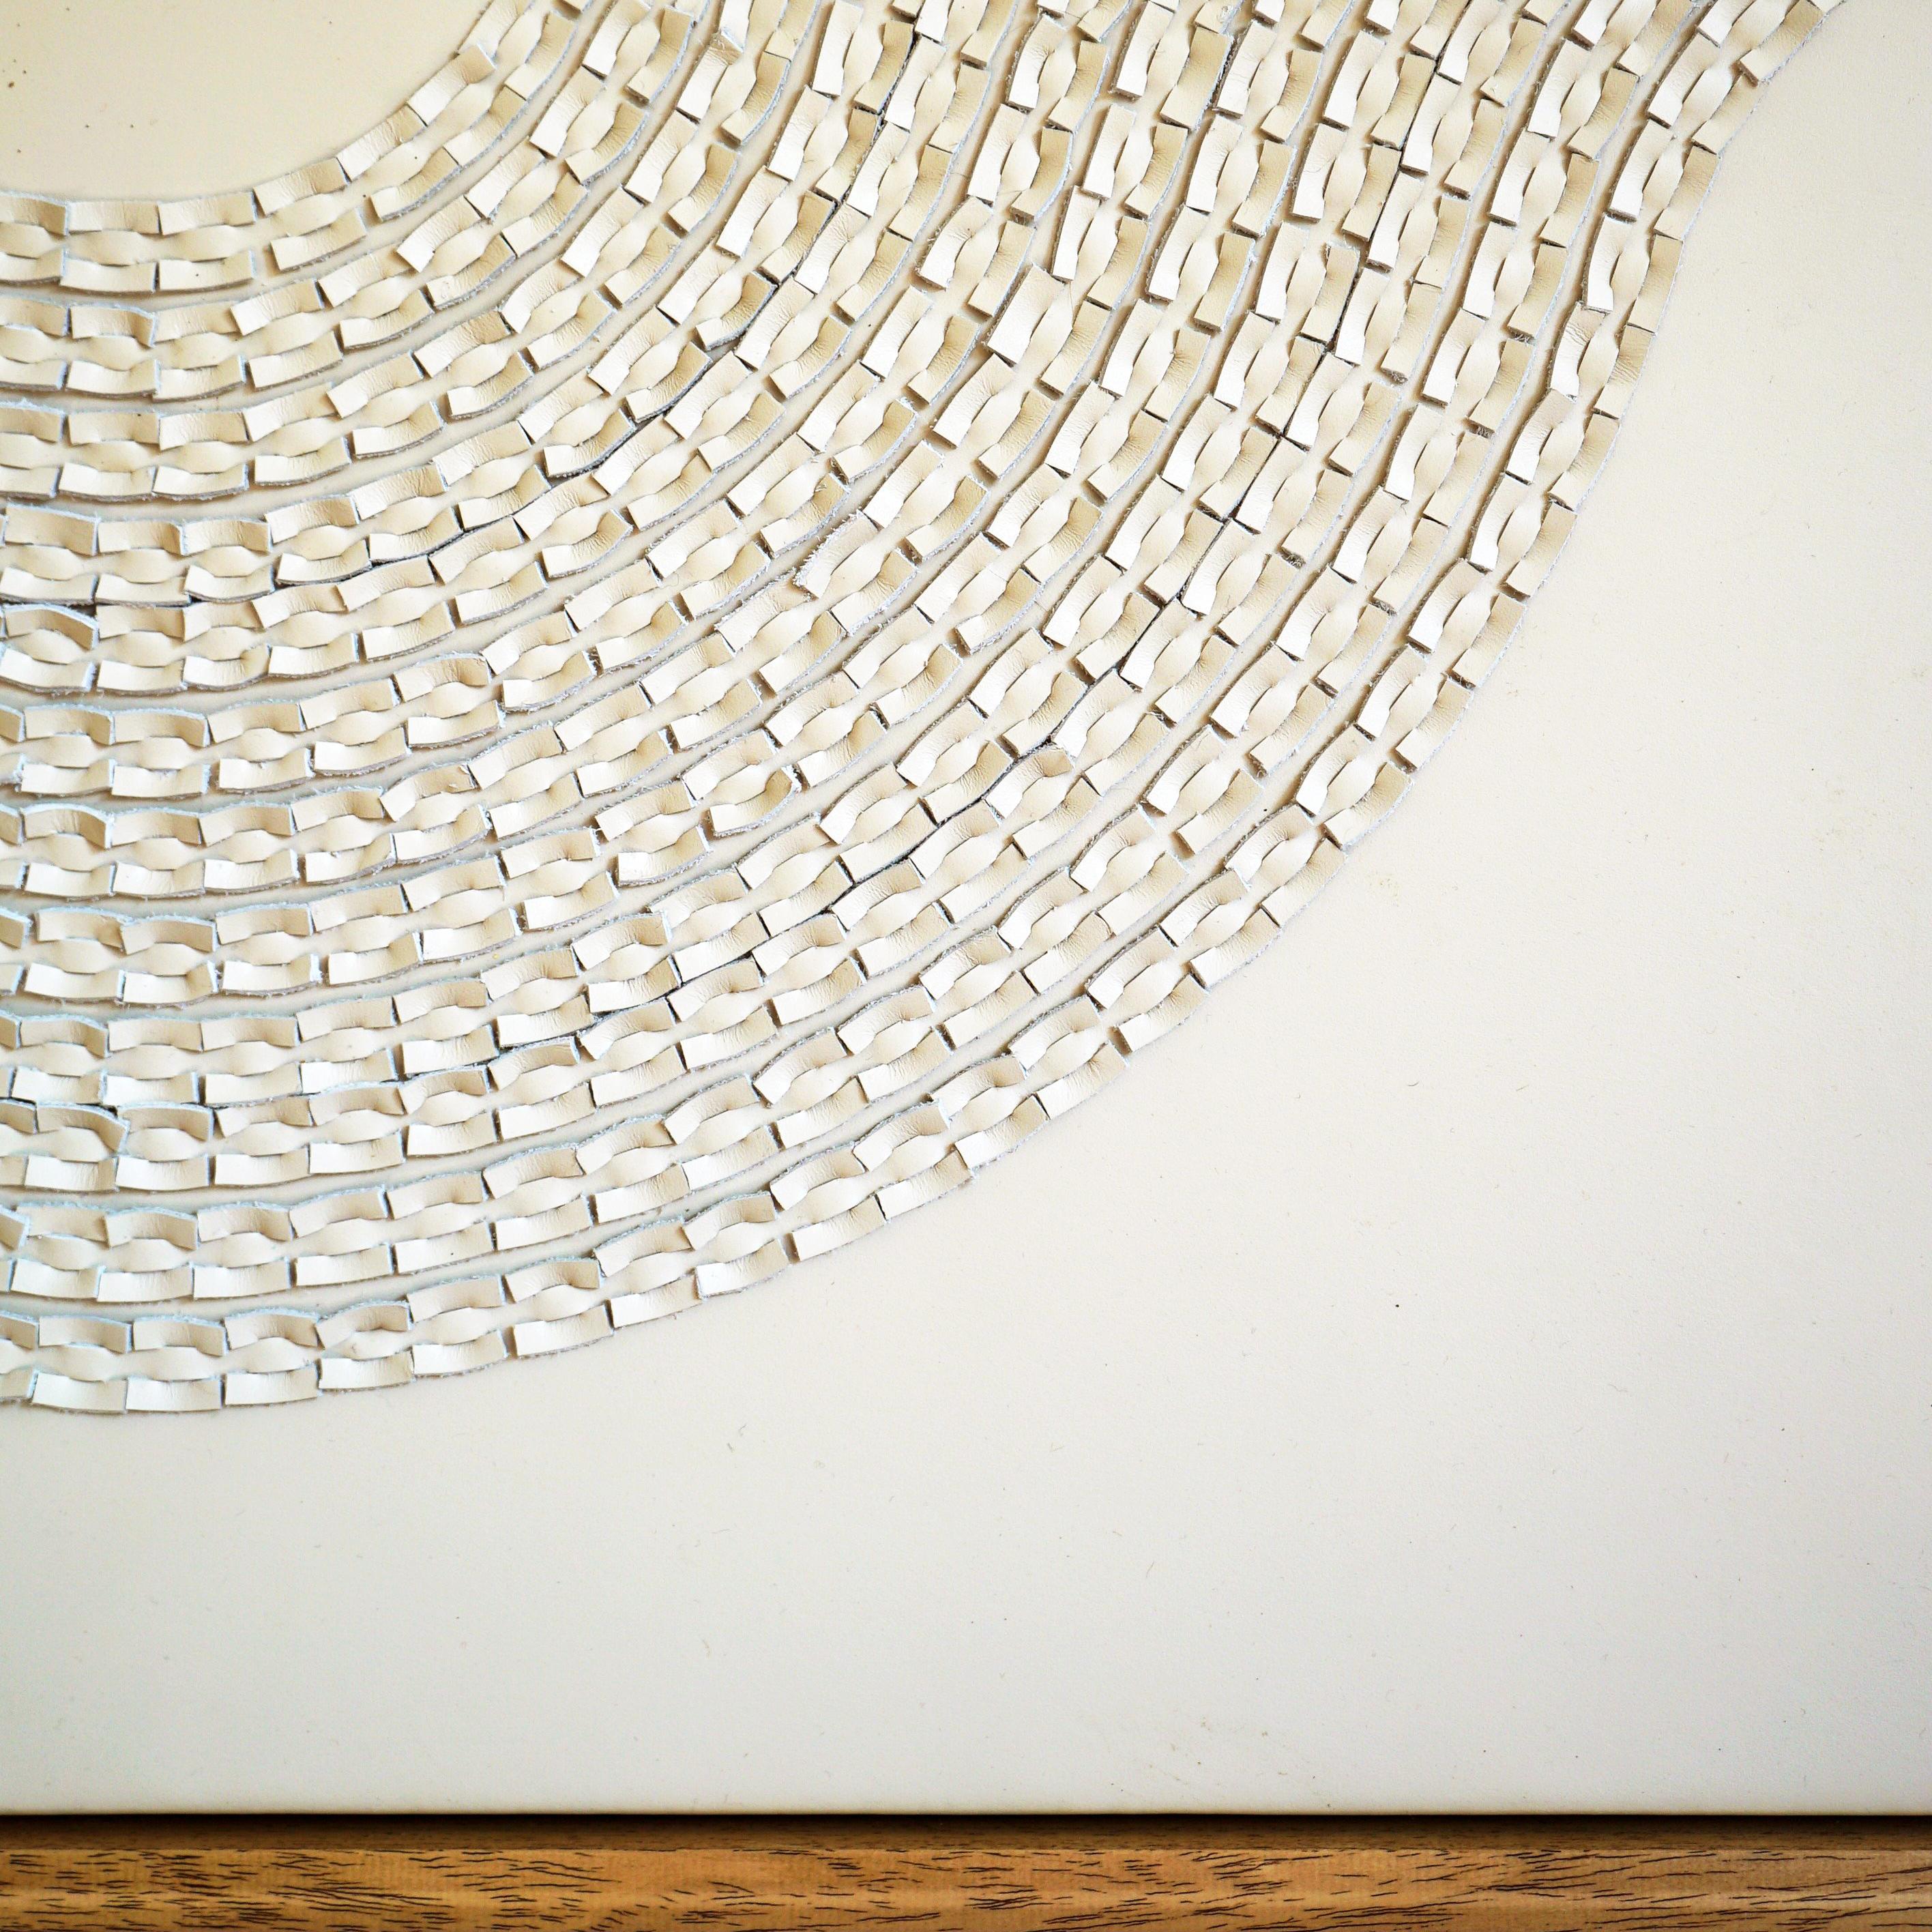 Wave:

A piece of 3D sculptural wall art designed and made from two layers of cream leather, woven together by Louise Heighes.
Measurements are 29 x 45 inches or 114 x 74 cm.

This piece has been inspired by basket weaving.
I love the way a